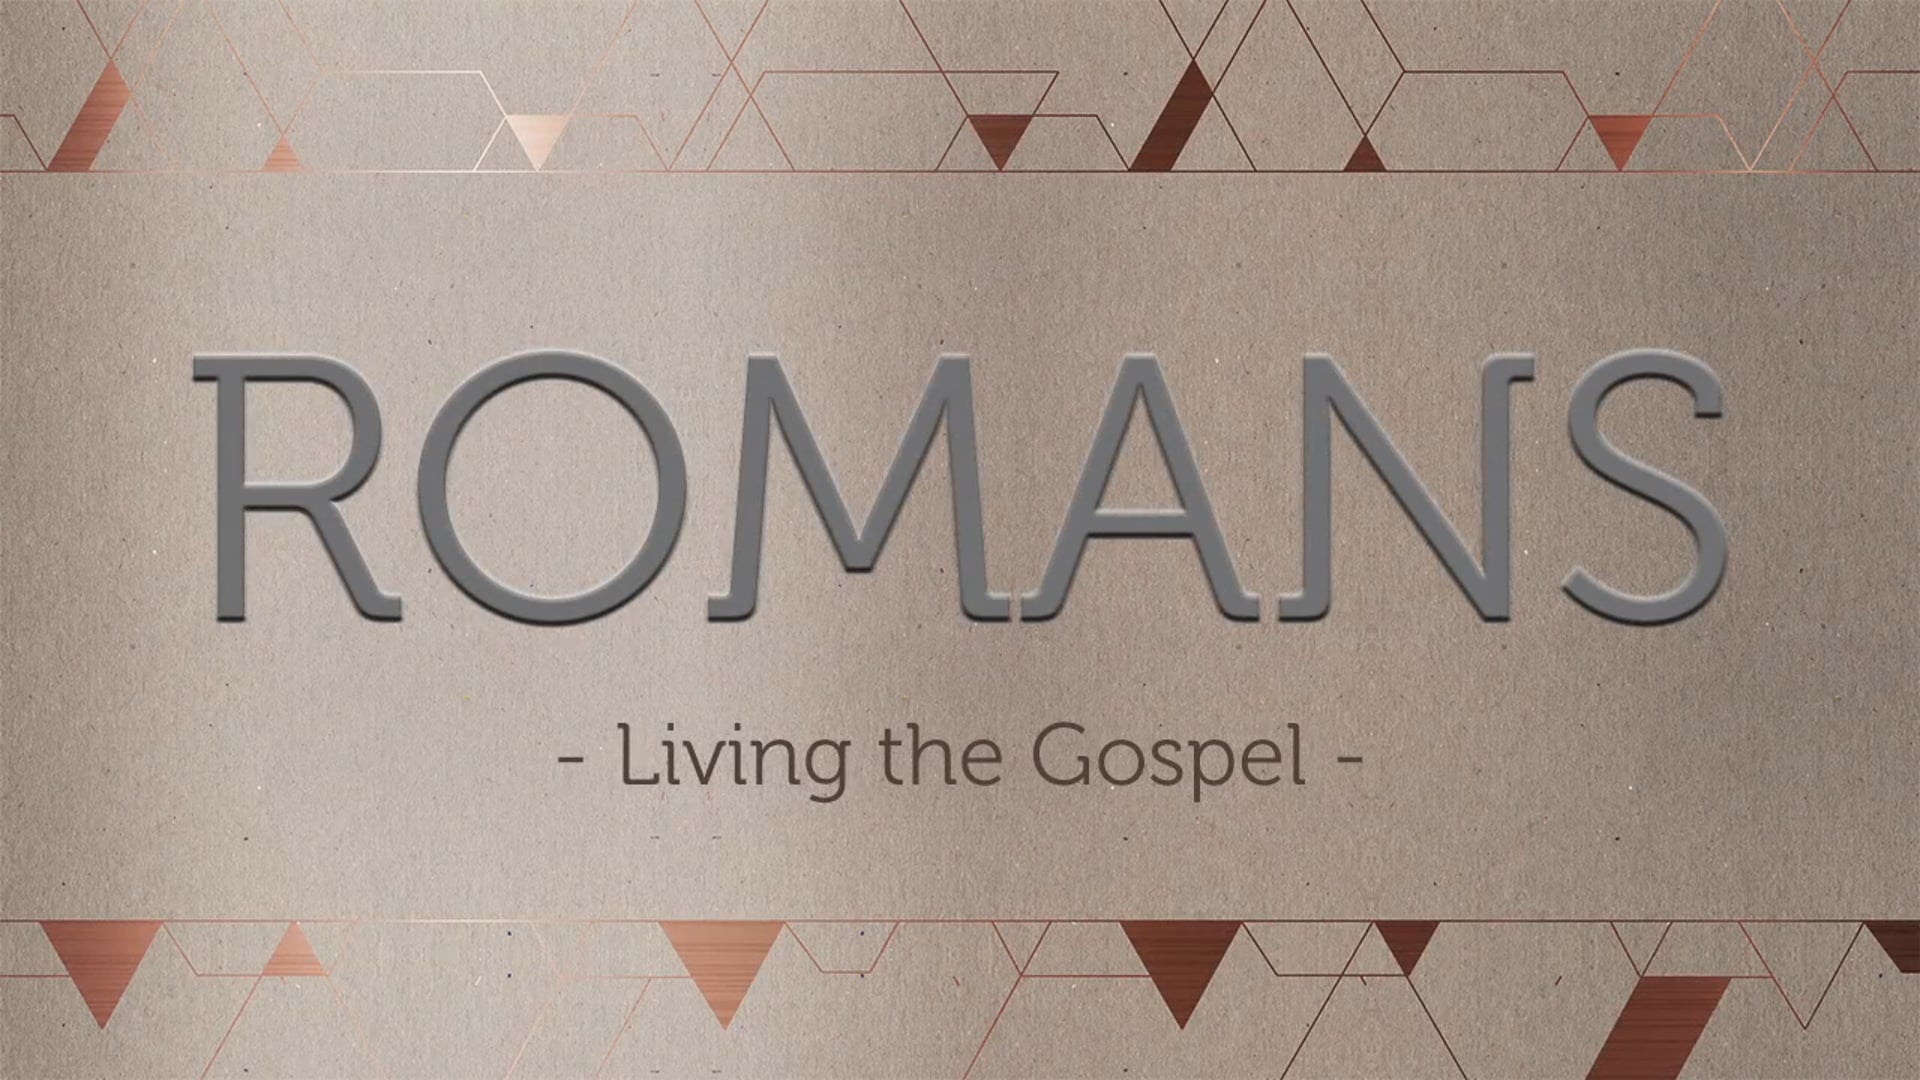 Week 4: Live at Peace- Romans 12:17-21